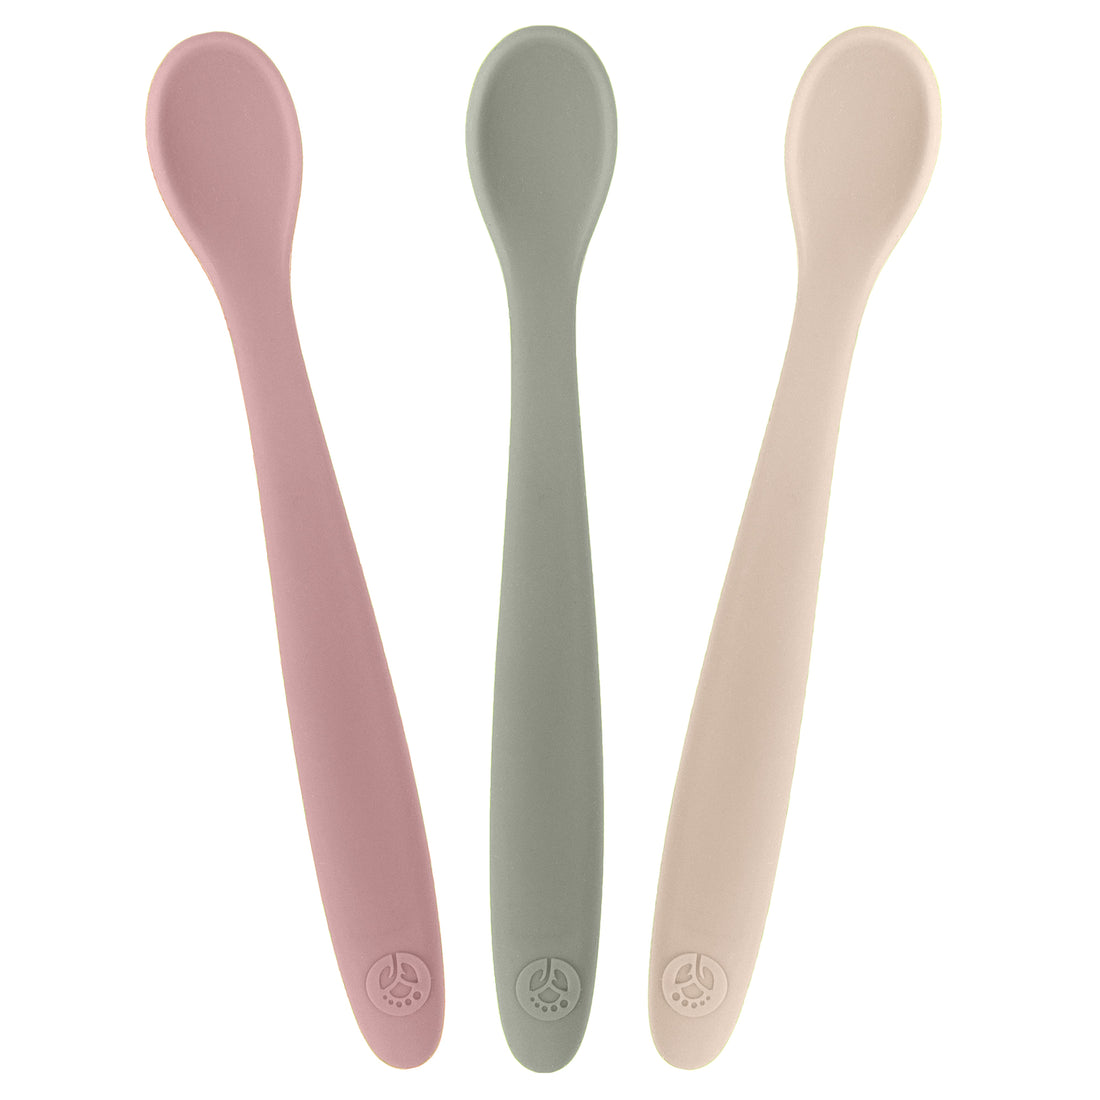 Silicone Baby Spoons First Stage Baby Feeding Spoons Stage 1 and